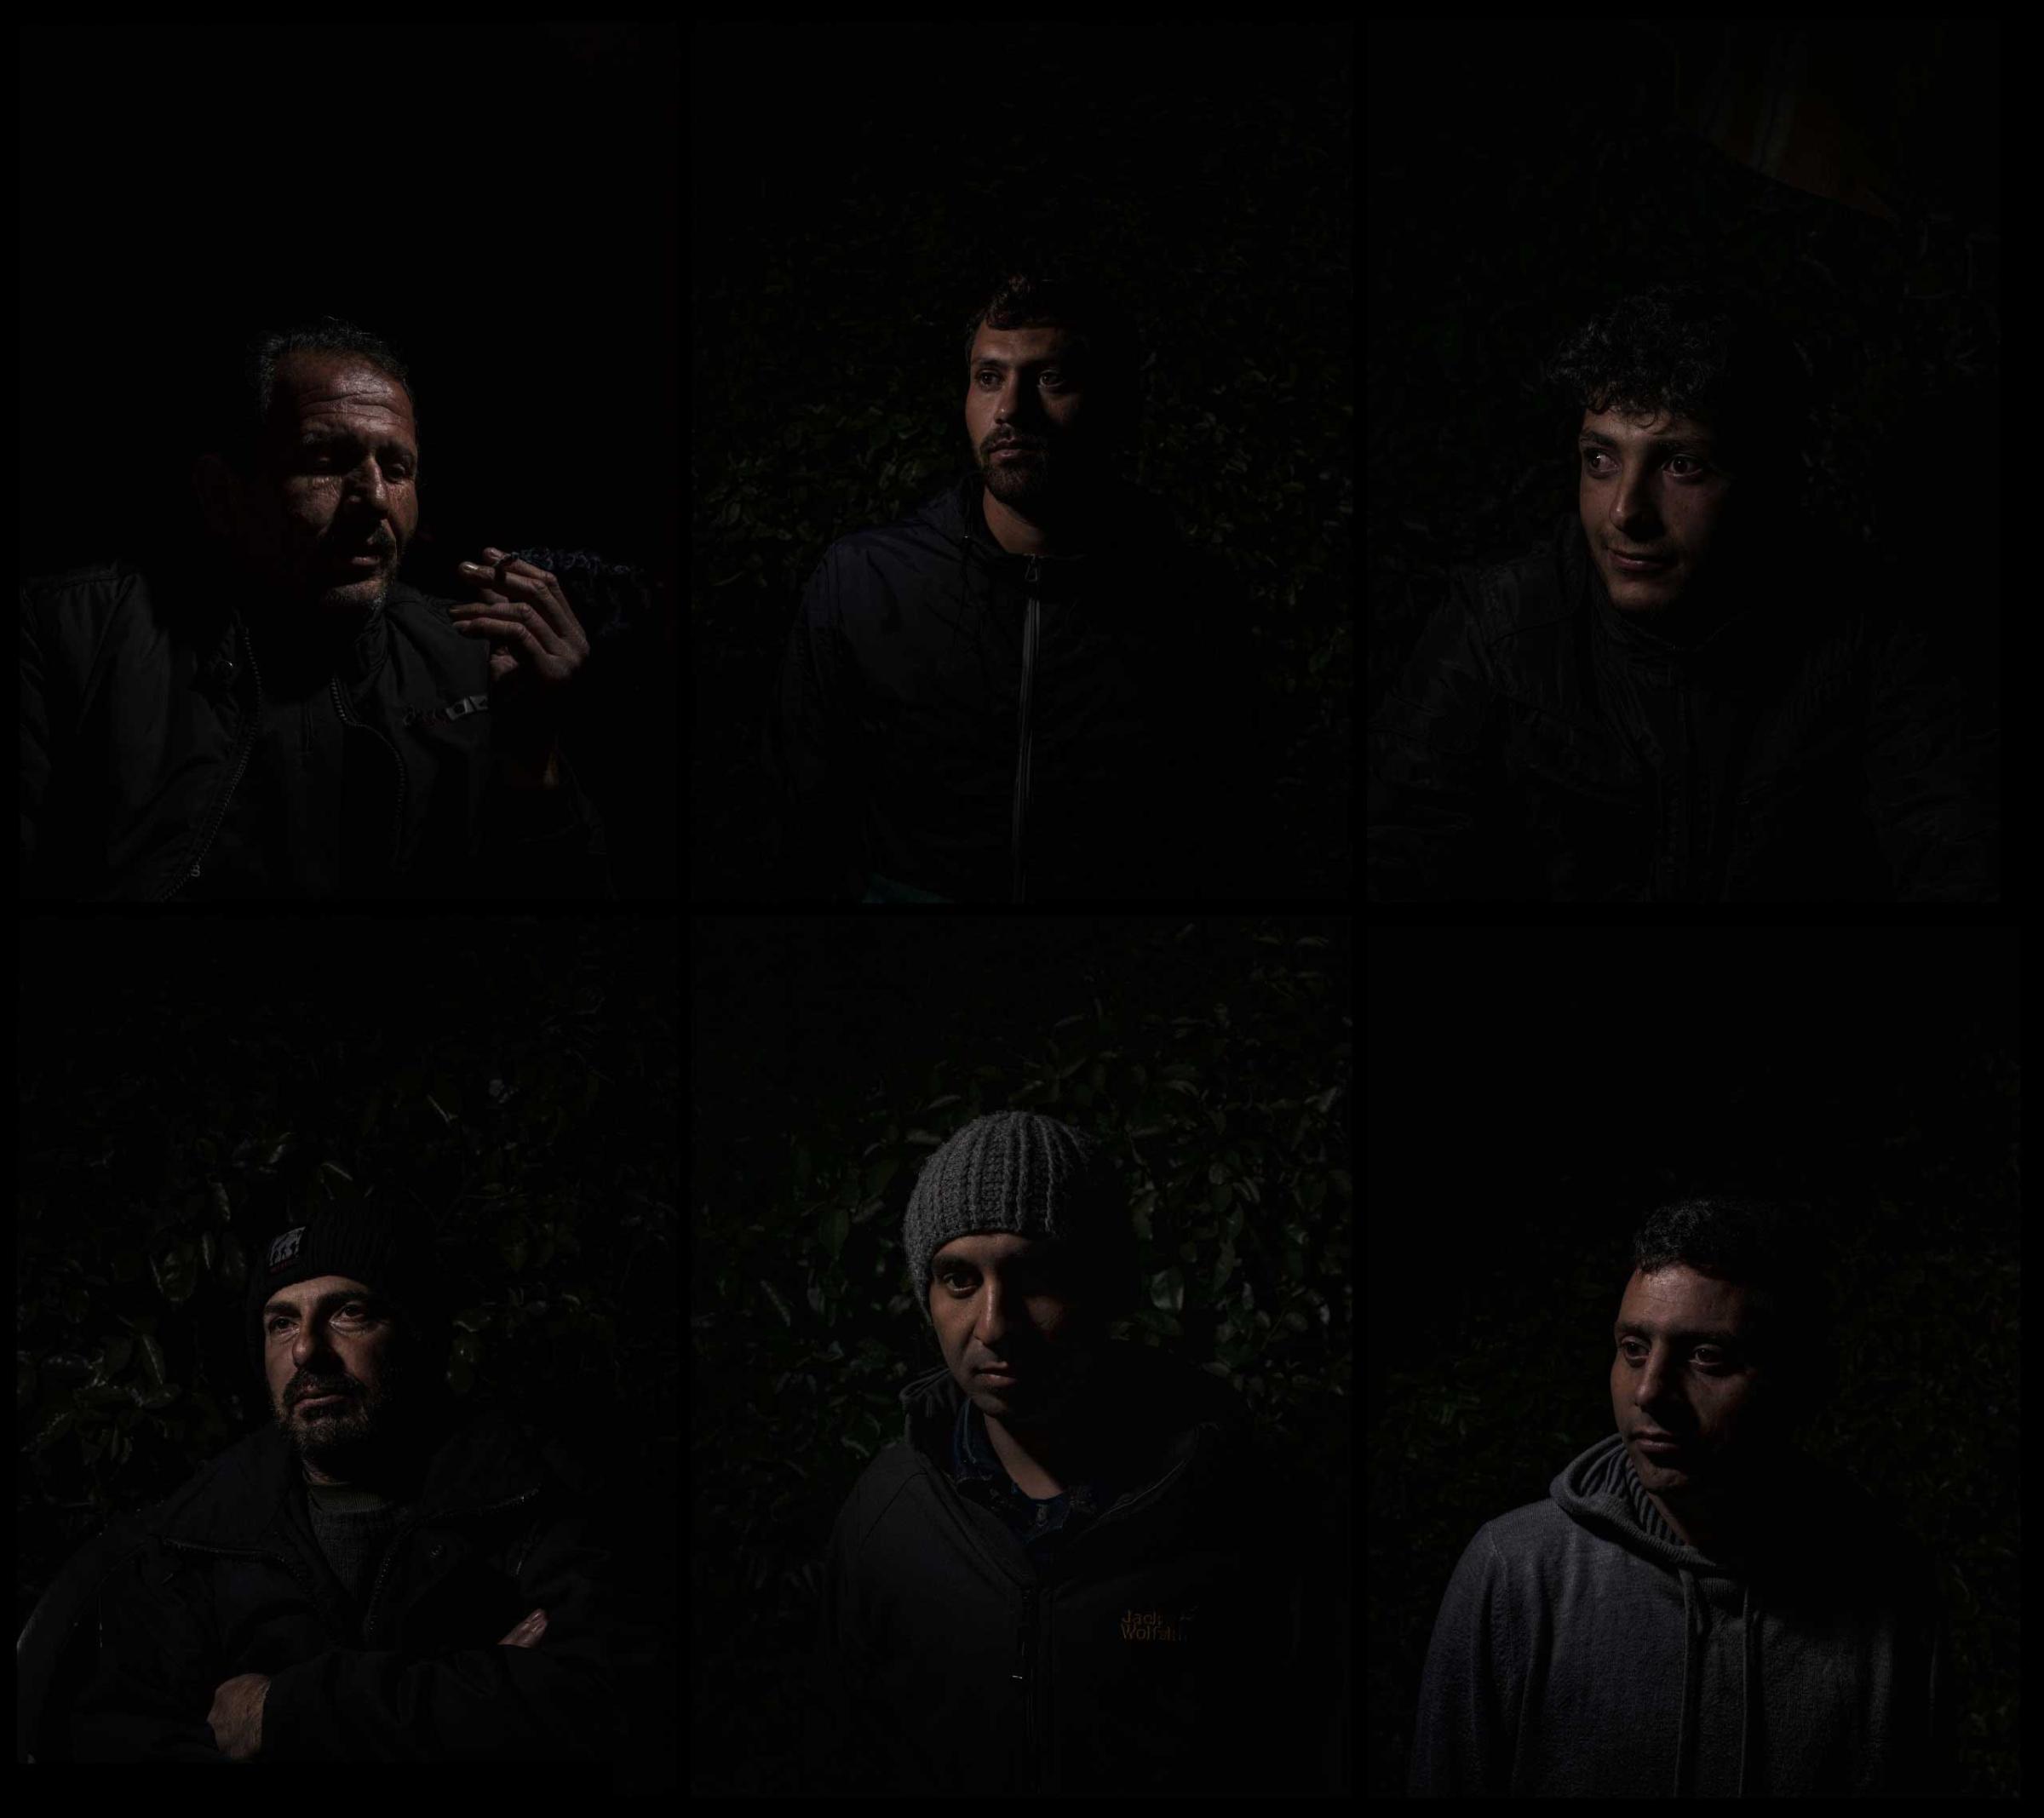 A grid of portraits of Syrian refugees who have recently arrived in Calais, France, 2015.